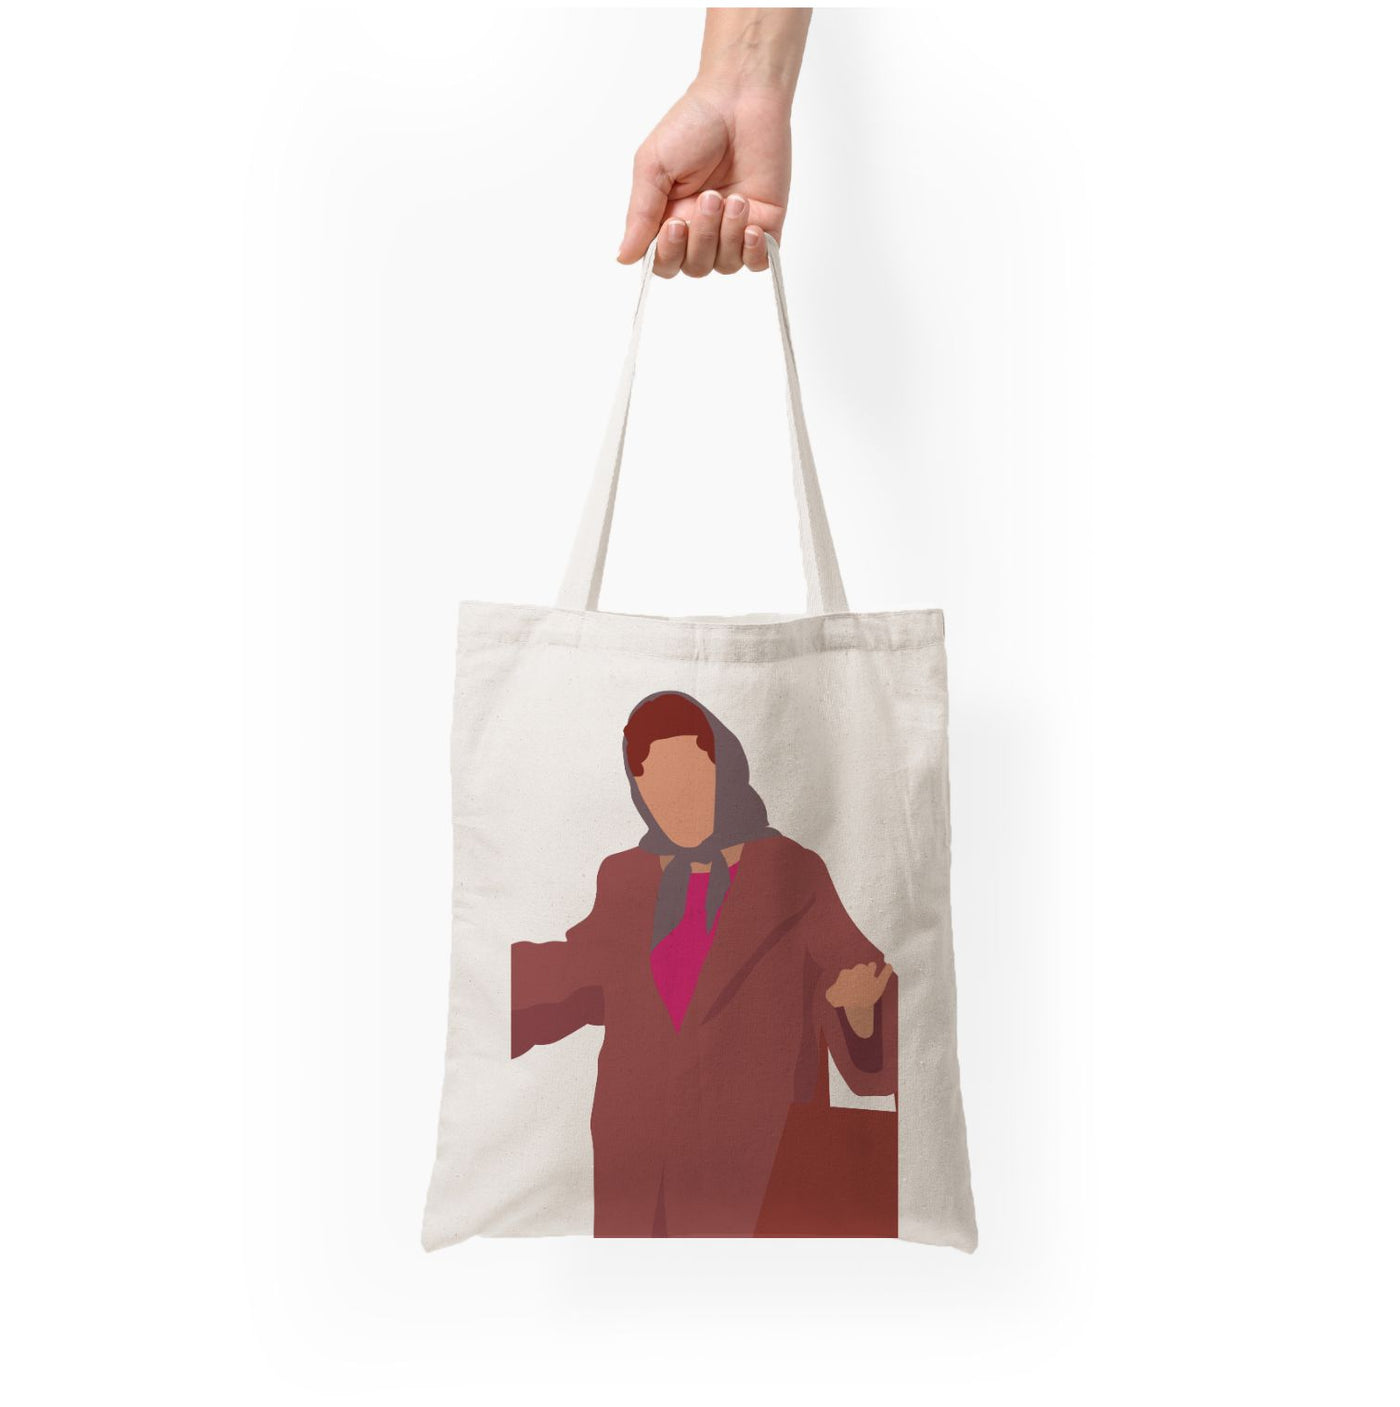 Noele Gordon With A Tote - Nolly Tote Bag